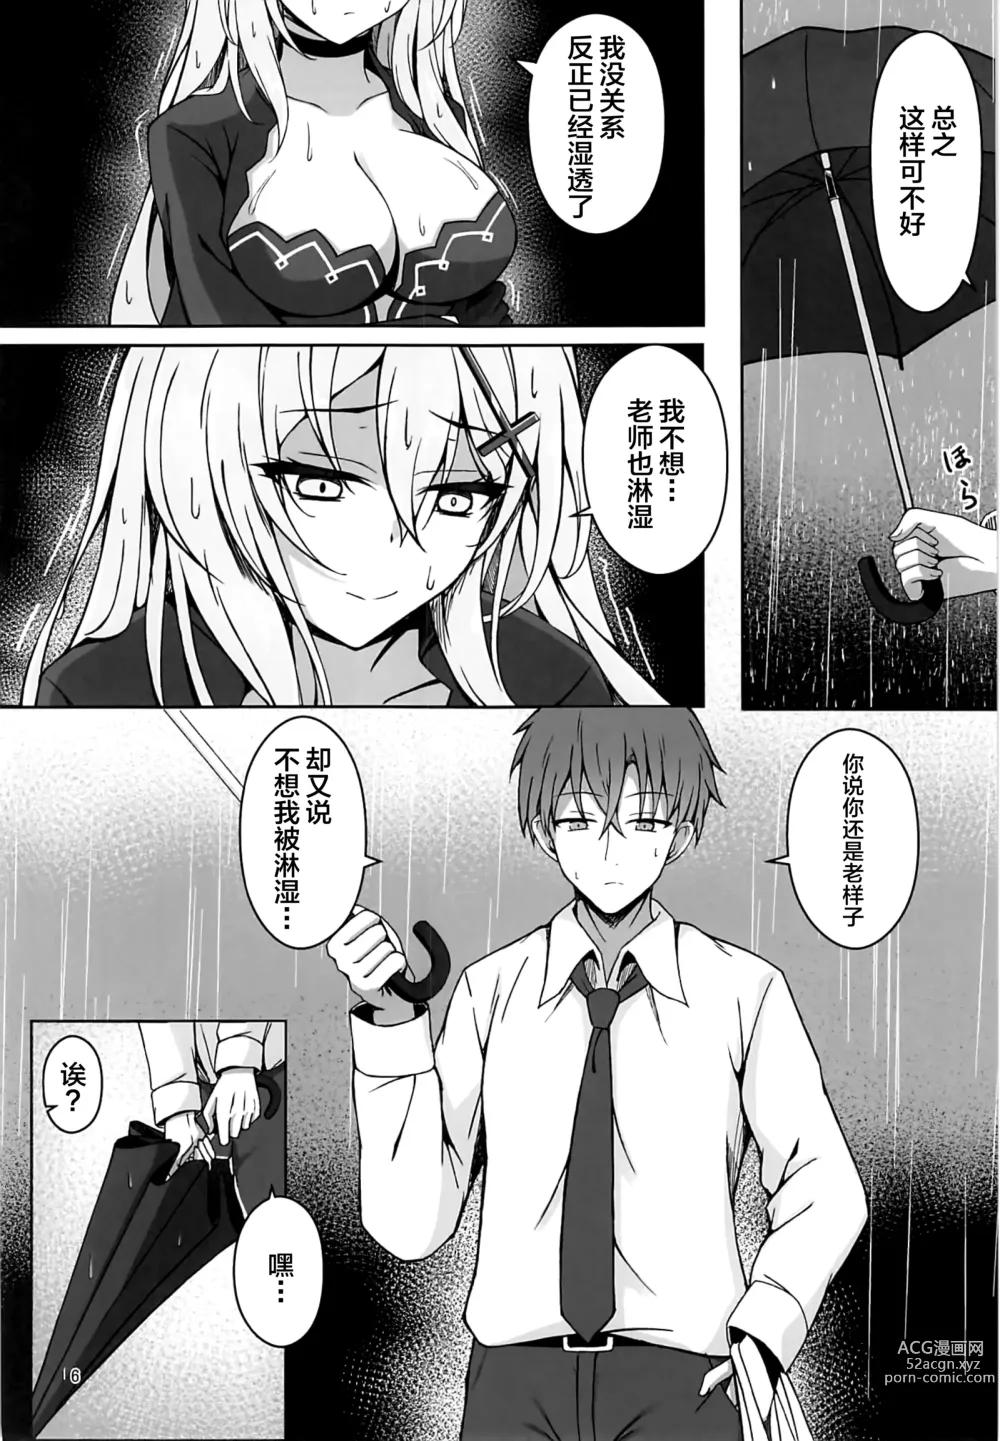 Page 5 of doujinshi Rain dew frost snow